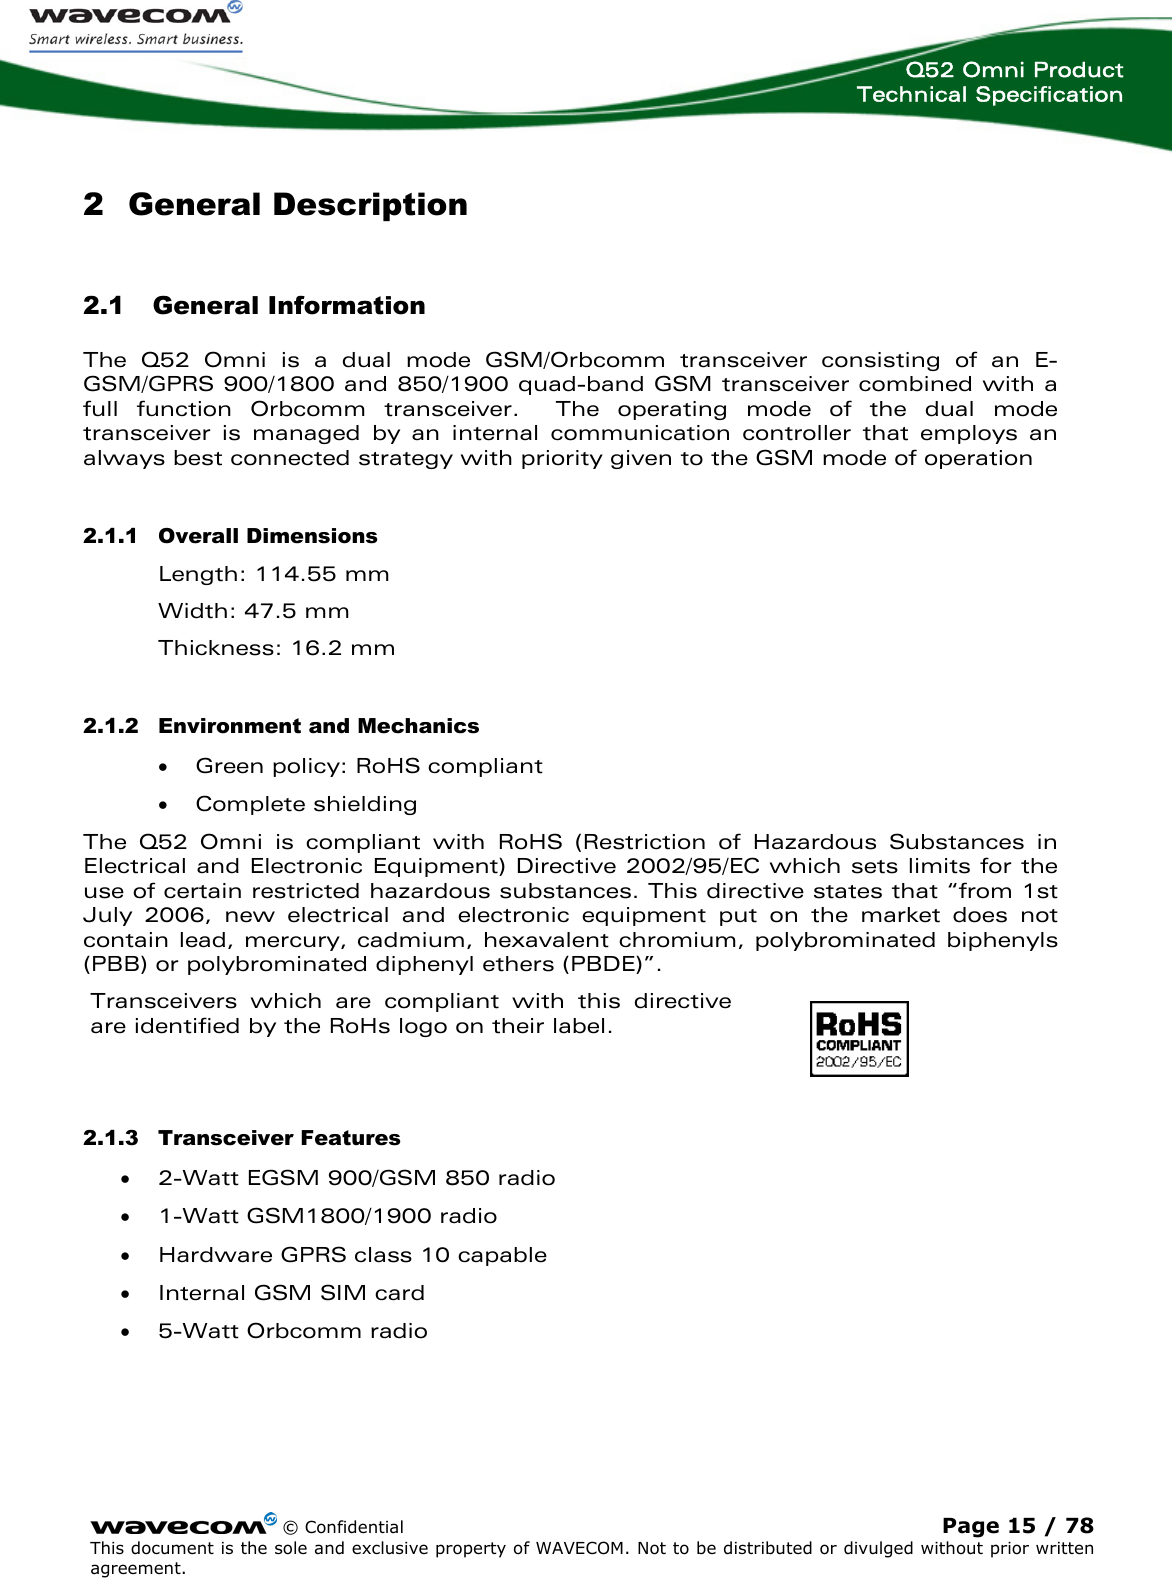  Q52 Omni Product Technical Specification    © Confidential Page 15 / 78 This document is the sole and exclusive property of WAVECOM. Not to be distributed or divulged without prior written agreement.  2 General Description 2.1 General Information The Q52 Omni is a dual mode GSM/Orbcomm transceiver consisting of an E-GSM/GPRS 900/1800 and 850/1900 quad-band GSM transceiver combined with a full function Orbcomm transceiver.  The operating mode of the dual mode transceiver is managed by an internal communication controller that employs an always best connected strategy with priority given to the GSM mode of operation 2.1.1 Overall Dimensions Length: 114.55 mm Width: 47.5 mm Thickness: 16.2 mm 2.1.2 Environment and Mechanics • Green policy: RoHS compliant • Complete shielding The Q52 Omni is compliant with RoHS (Restriction of Hazardous Substances in Electrical and Electronic Equipment) Directive 2002/95/EC which sets limits for the use of certain restricted hazardous substances. This directive states that “from 1st July 2006, new electrical and electronic equipment put on the market does not contain lead, mercury, cadmium, hexavalent chromium, polybrominated biphenyls (PBB) or polybrominated diphenyl ethers (PBDE)”. Transceivers which are compliant with this directive are identified by the RoHs logo on their label.  2.1.3 Transceiver Features • 2-Watt EGSM 900/GSM 850 radio • 1-Watt GSM1800/1900 radio • Hardware GPRS class 10 capable • Internal GSM SIM card • 5-Watt Orbcomm radio 